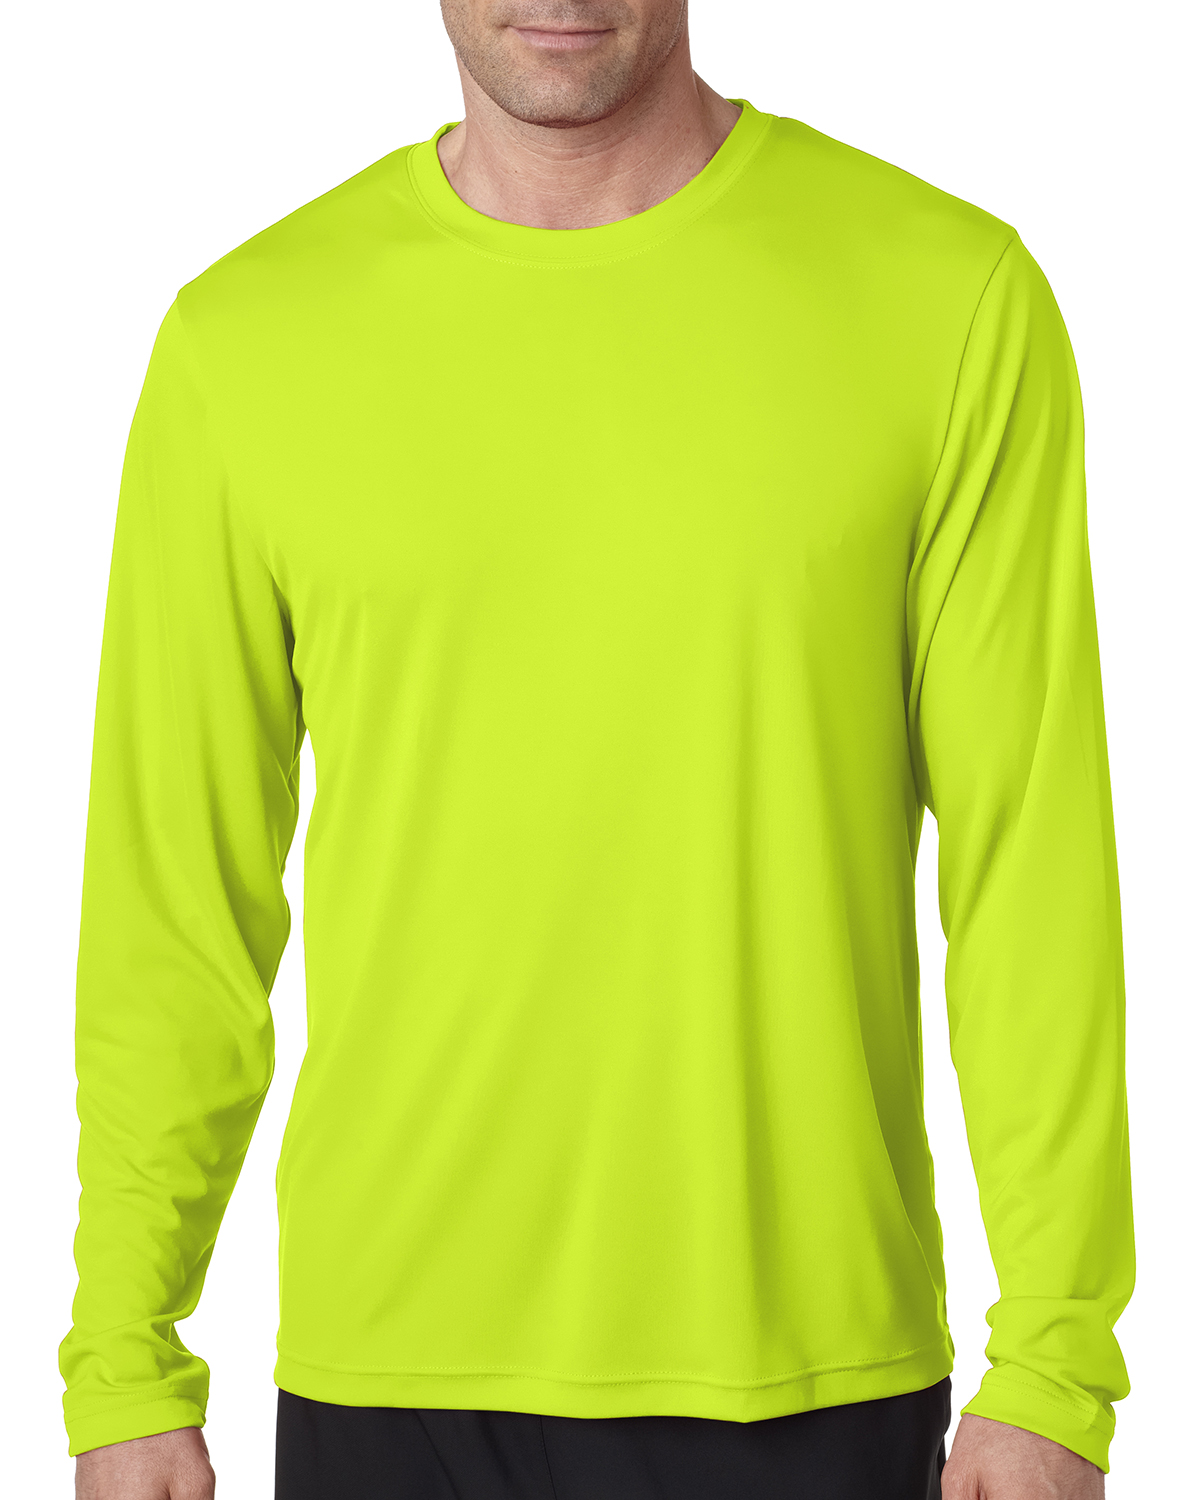 Hanes 482L 100% Polyester Adult Cool DRI Long-Sleeve Performance T-Shirt 1 Safety Orange 1 Deep Royal Small 